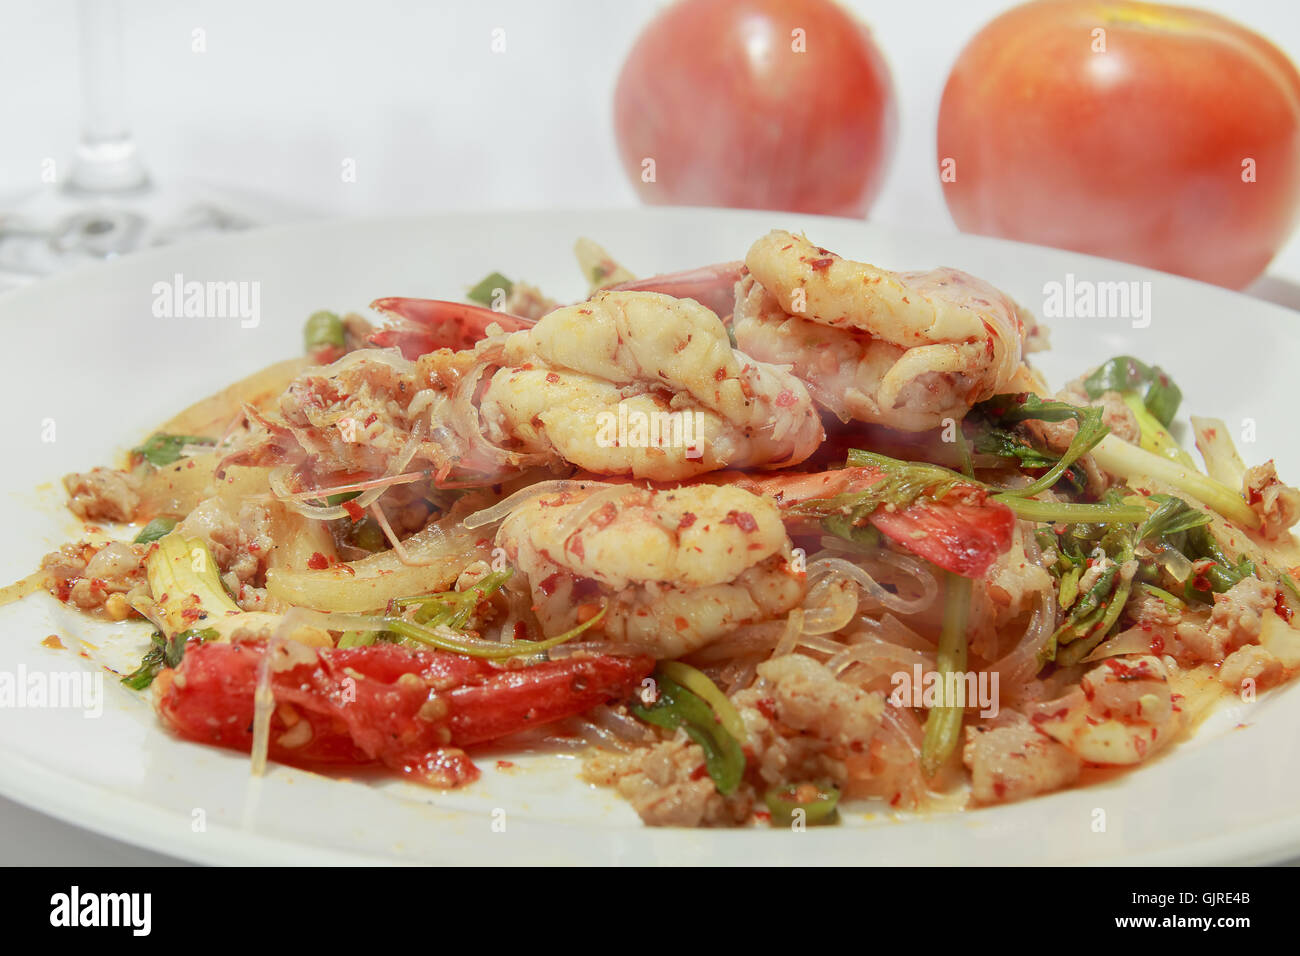 Shrimp vermicelli salad with spicy food grade selected focus. Stock Photo